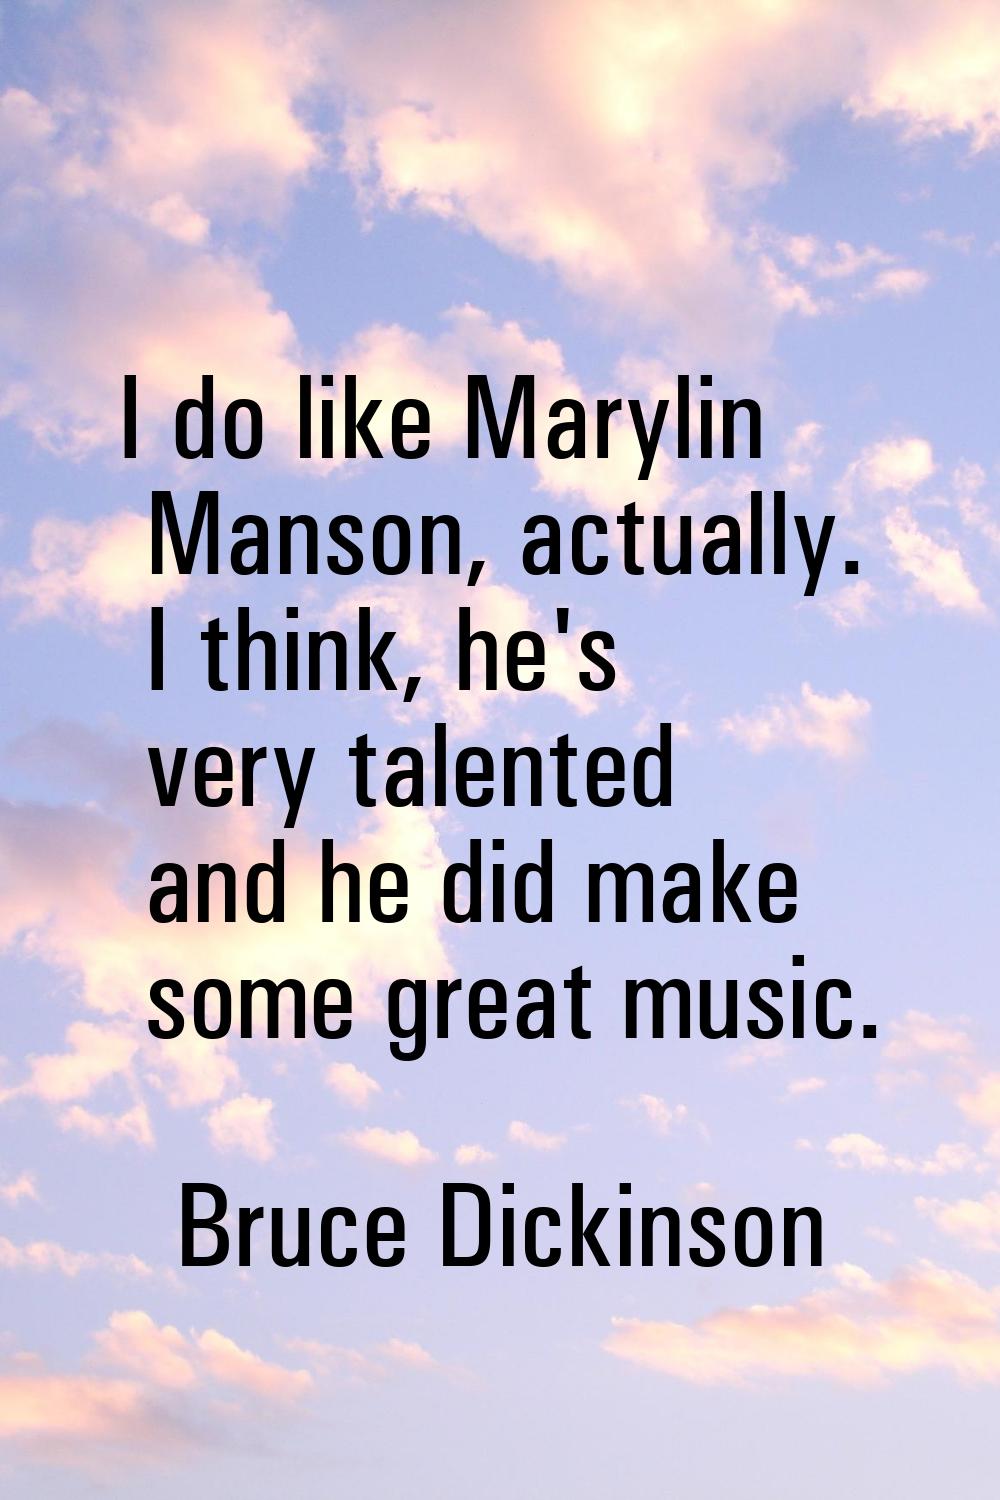 I do like Marylin Manson, actually. I think, he's very talented and he did make some great music.